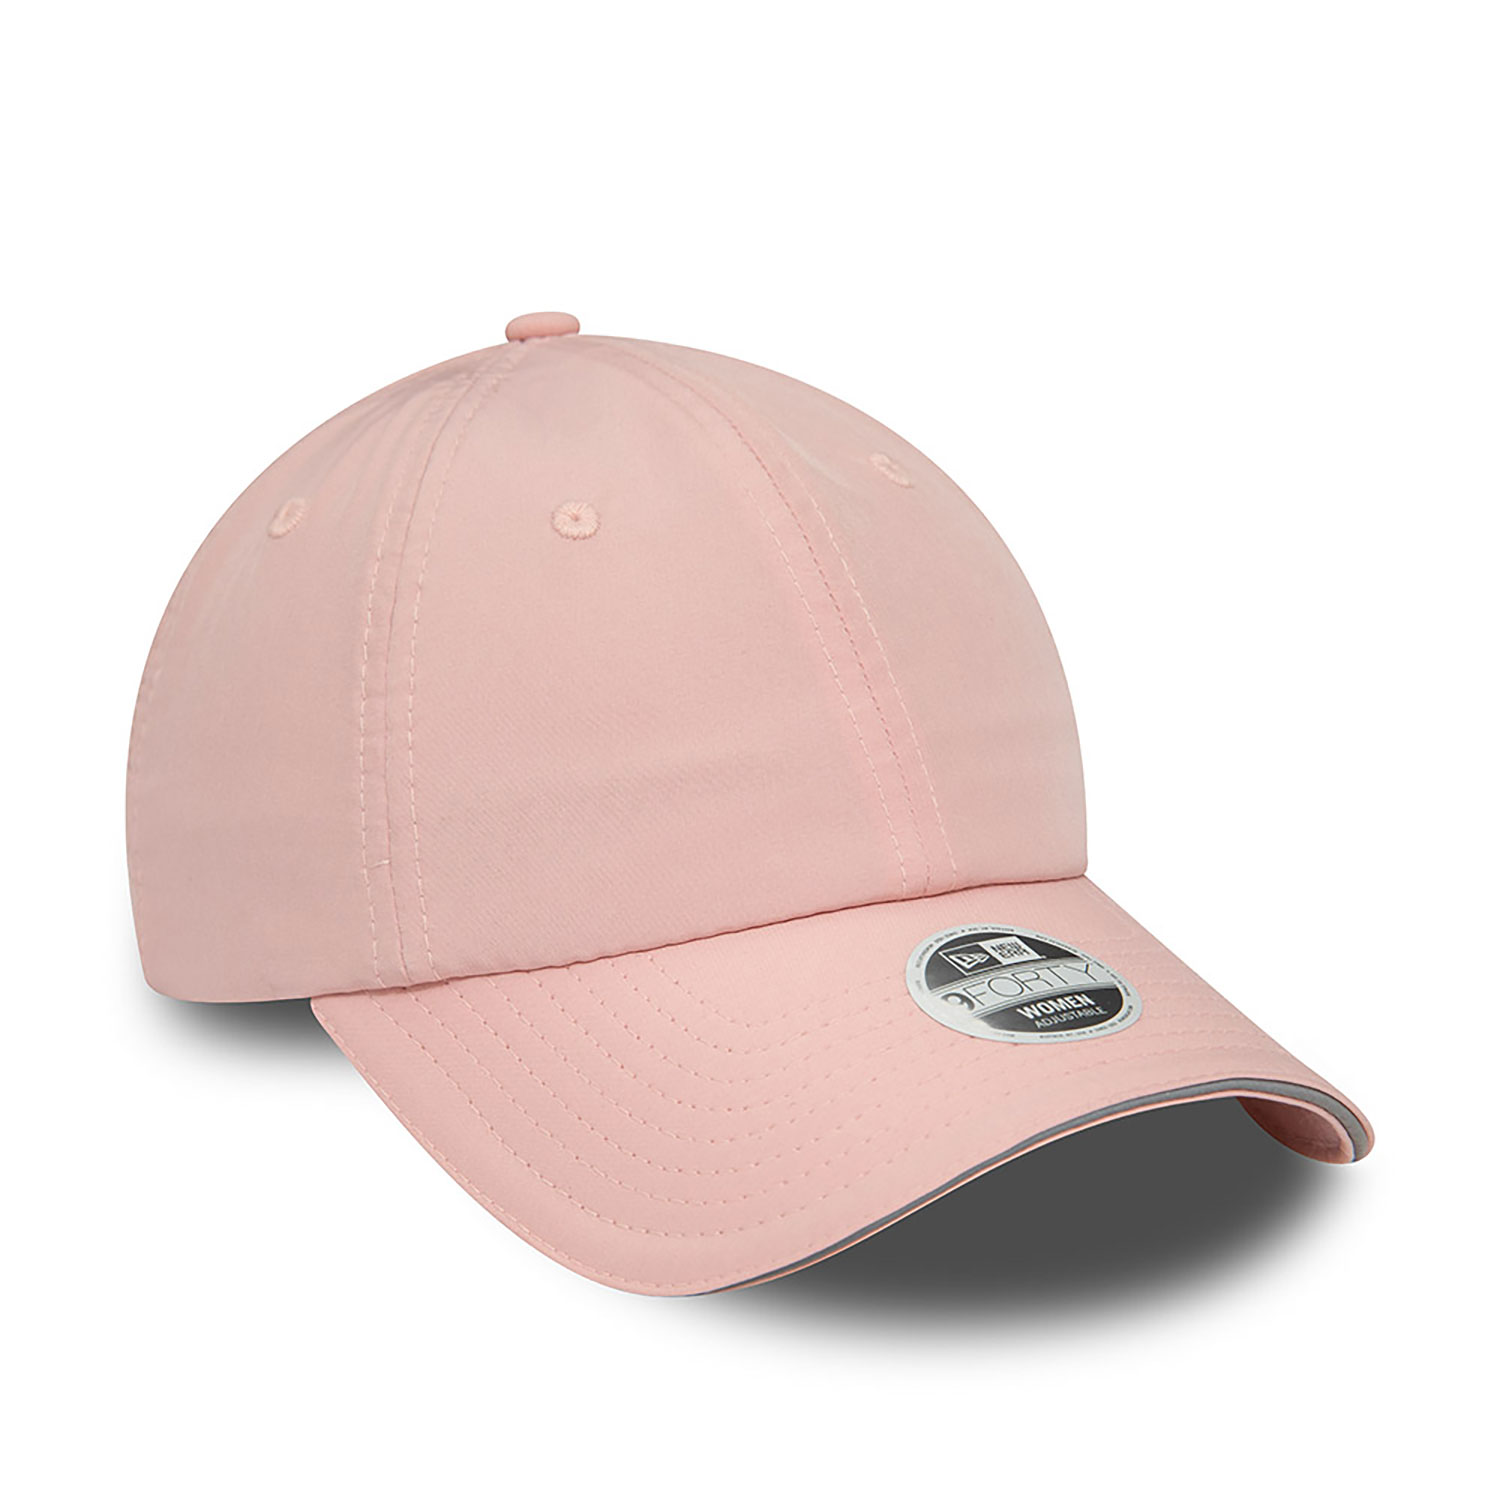 New Era Womens Ponytail Open Back Pink 9FORTY Adjustable Cap